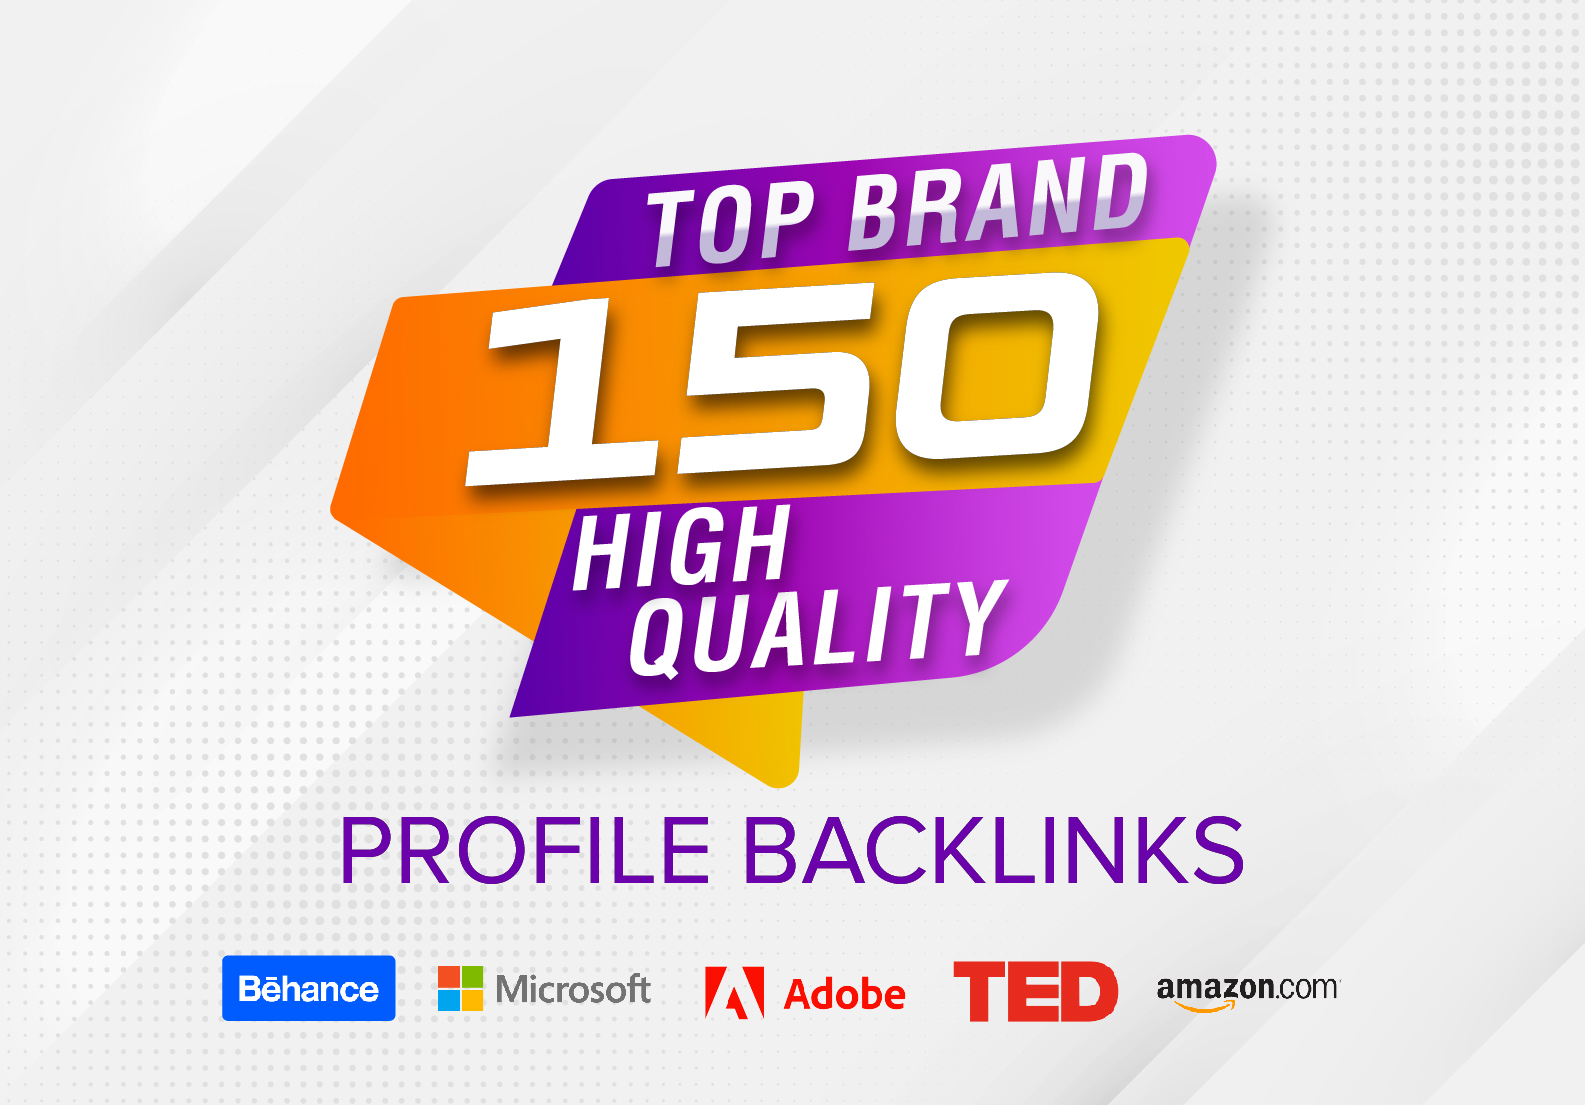 I will Skyrocket Your SEO with High Quality 150 Profile Backlinks!